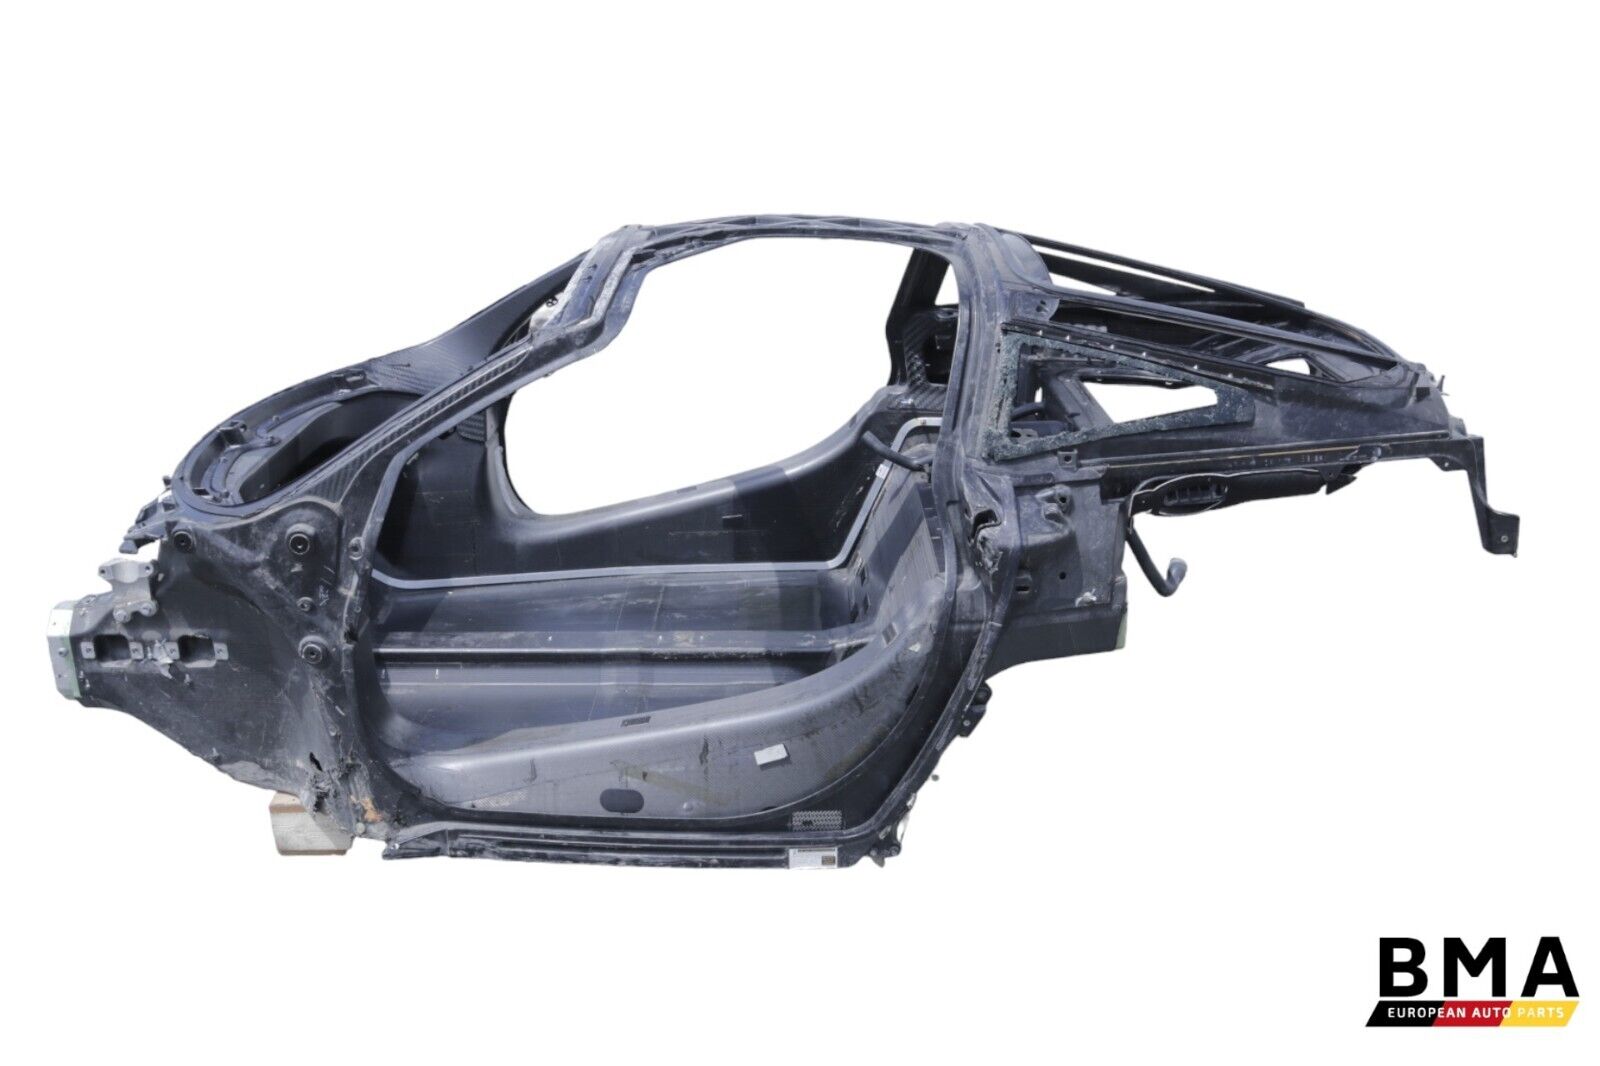 *Damaged* McLaren 720S Coupe Carbon Fiber Monocell Hull Tub Cockpit Chassis